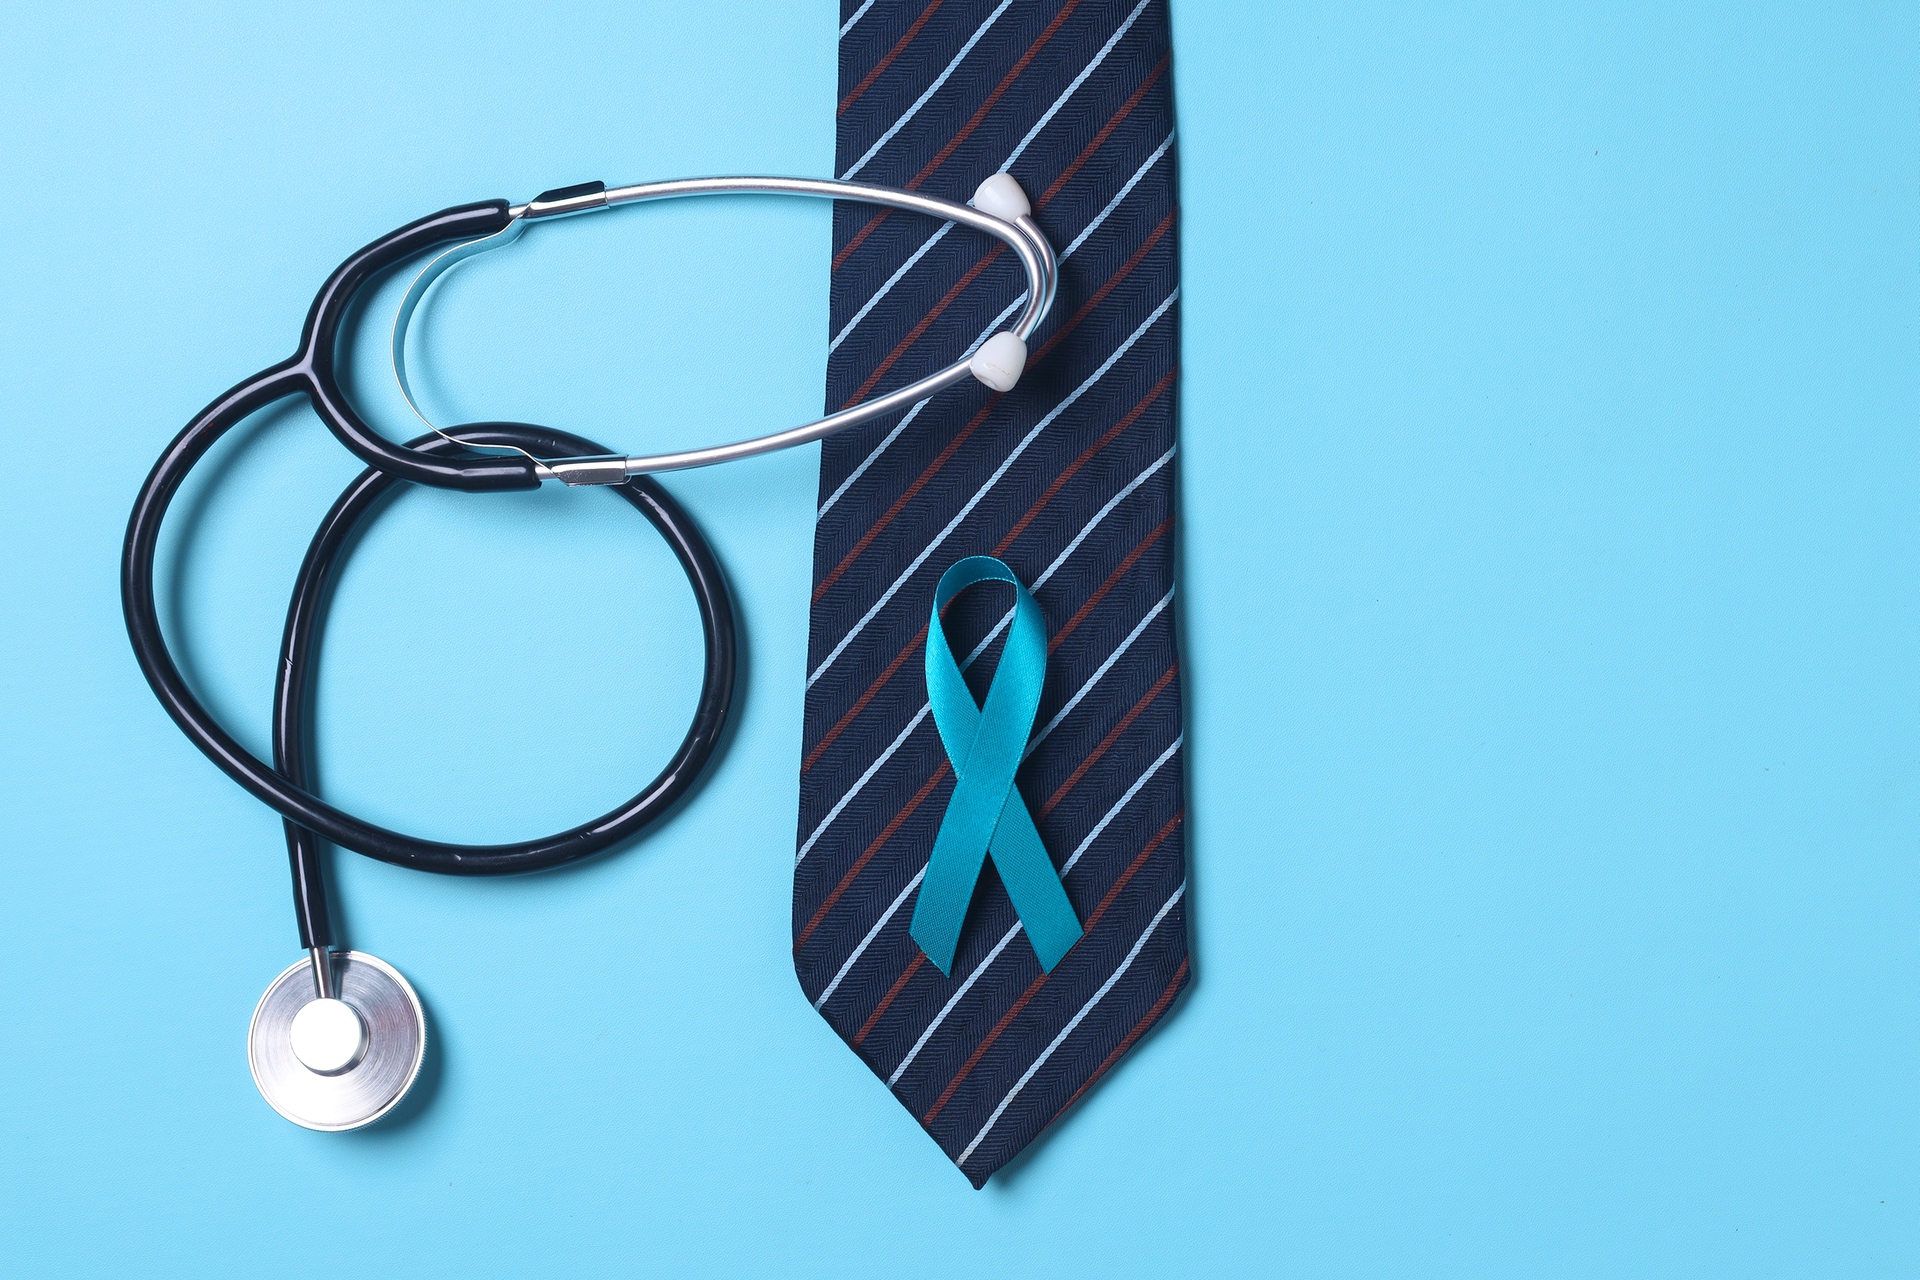 Stethoscope, striped tie and prostate cancer awareness ribbon against blue background